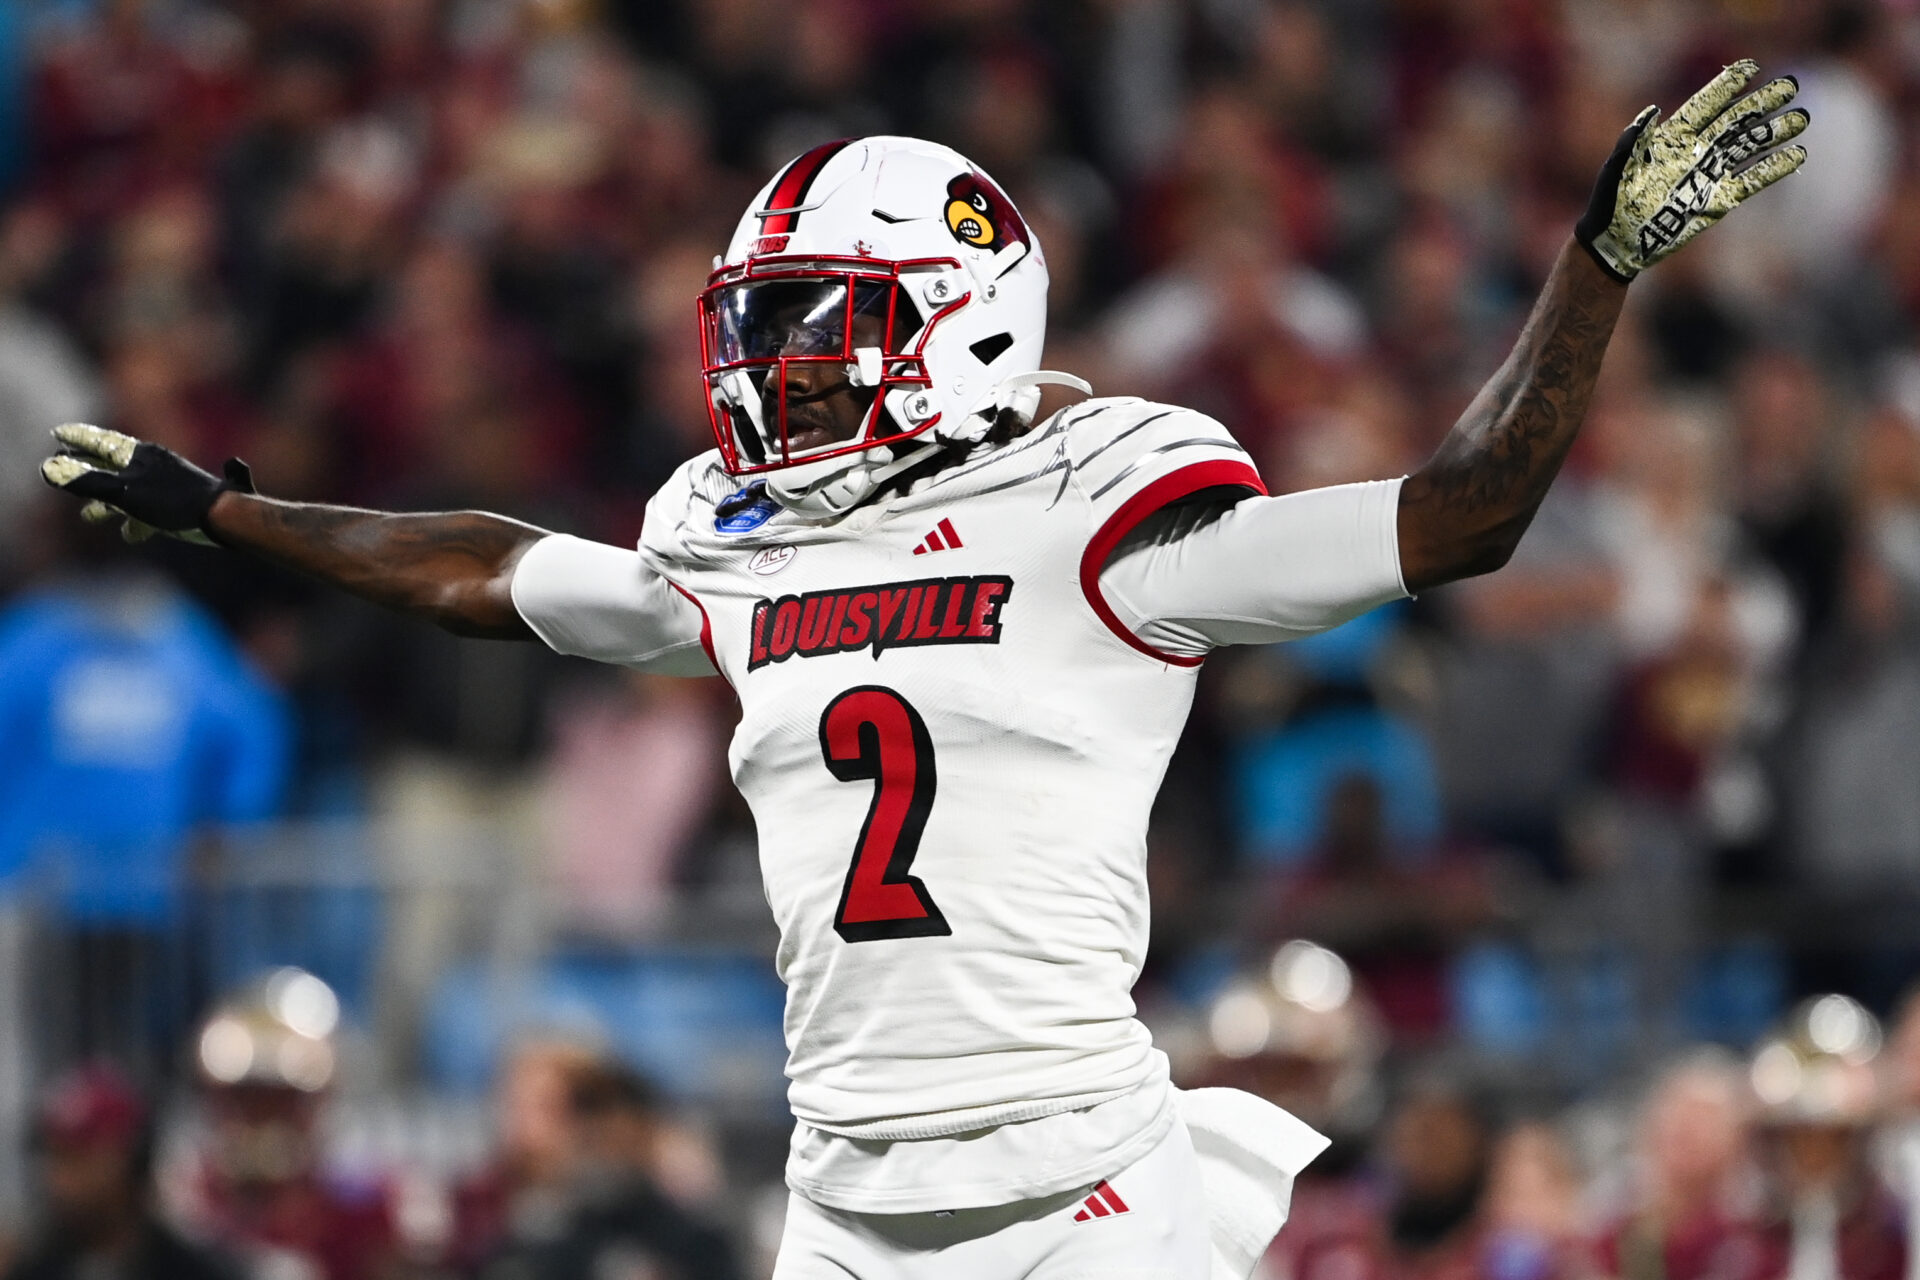 Louisville Cardinals defensive back Jarvis Brownlee Jr. (2) reacts in the second quarter against the Florida State Seminoles at Bank of America Stadium.